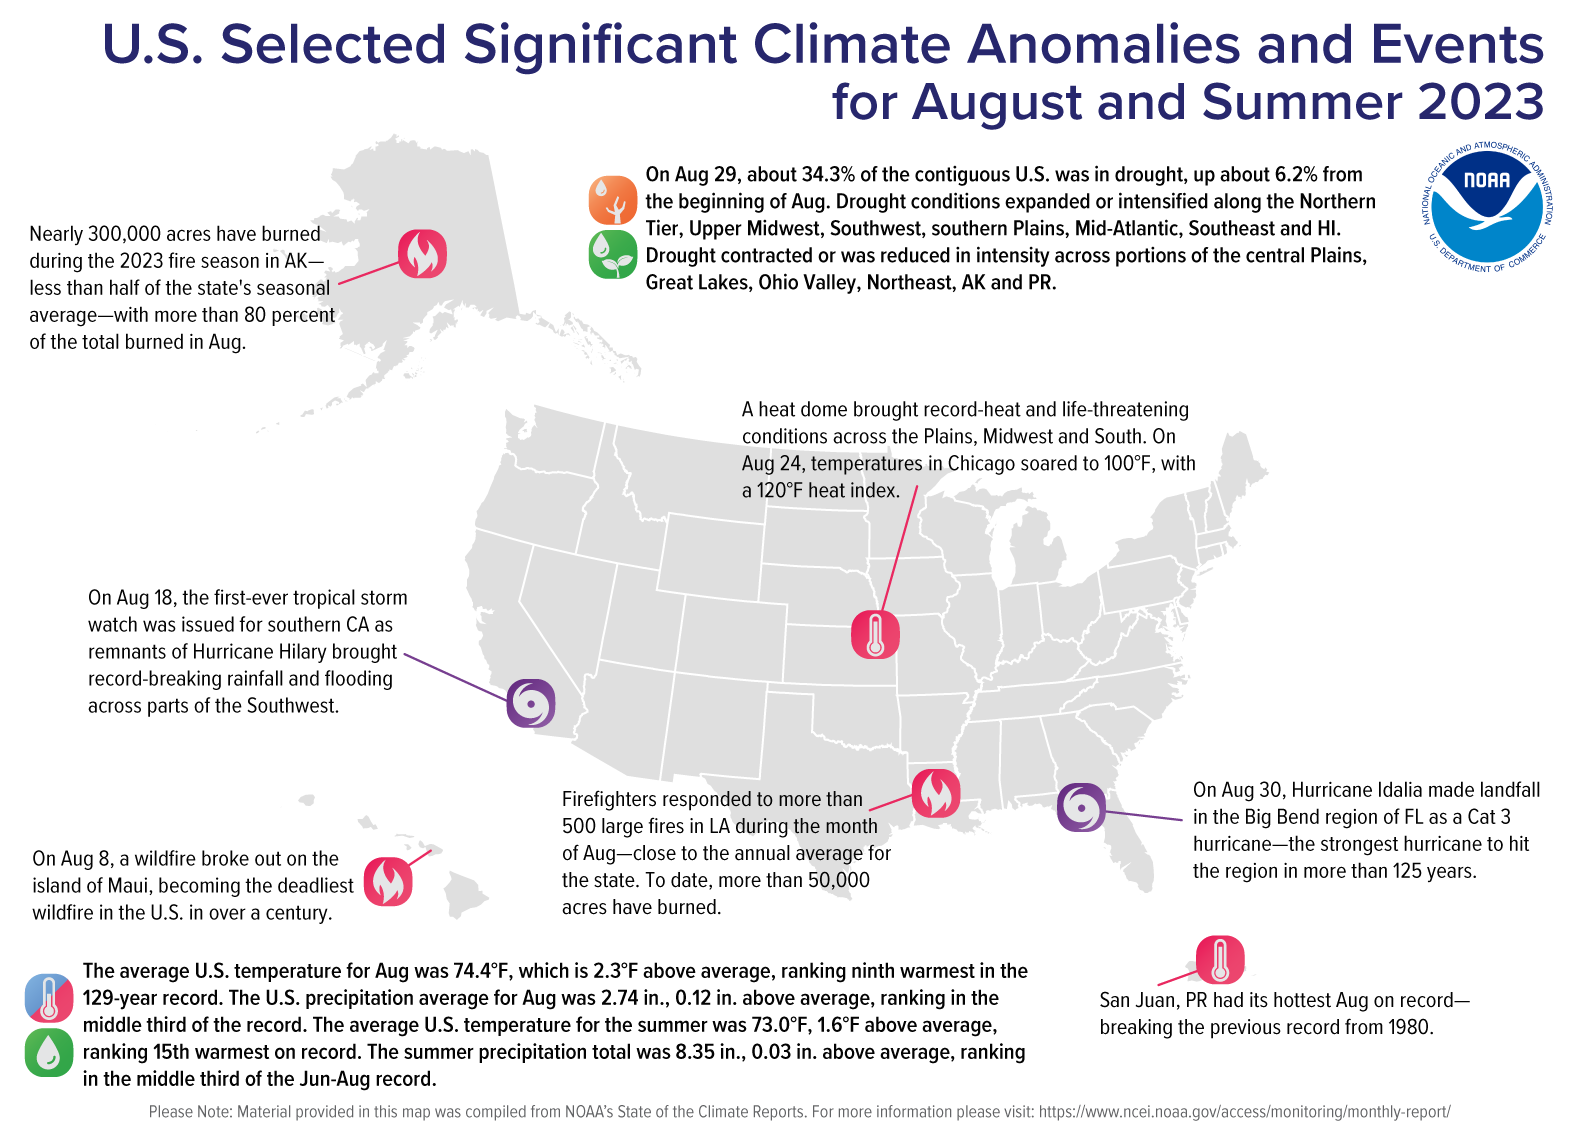 A map of the U.S. plotted with significant climate events that occurred during August 2023. 